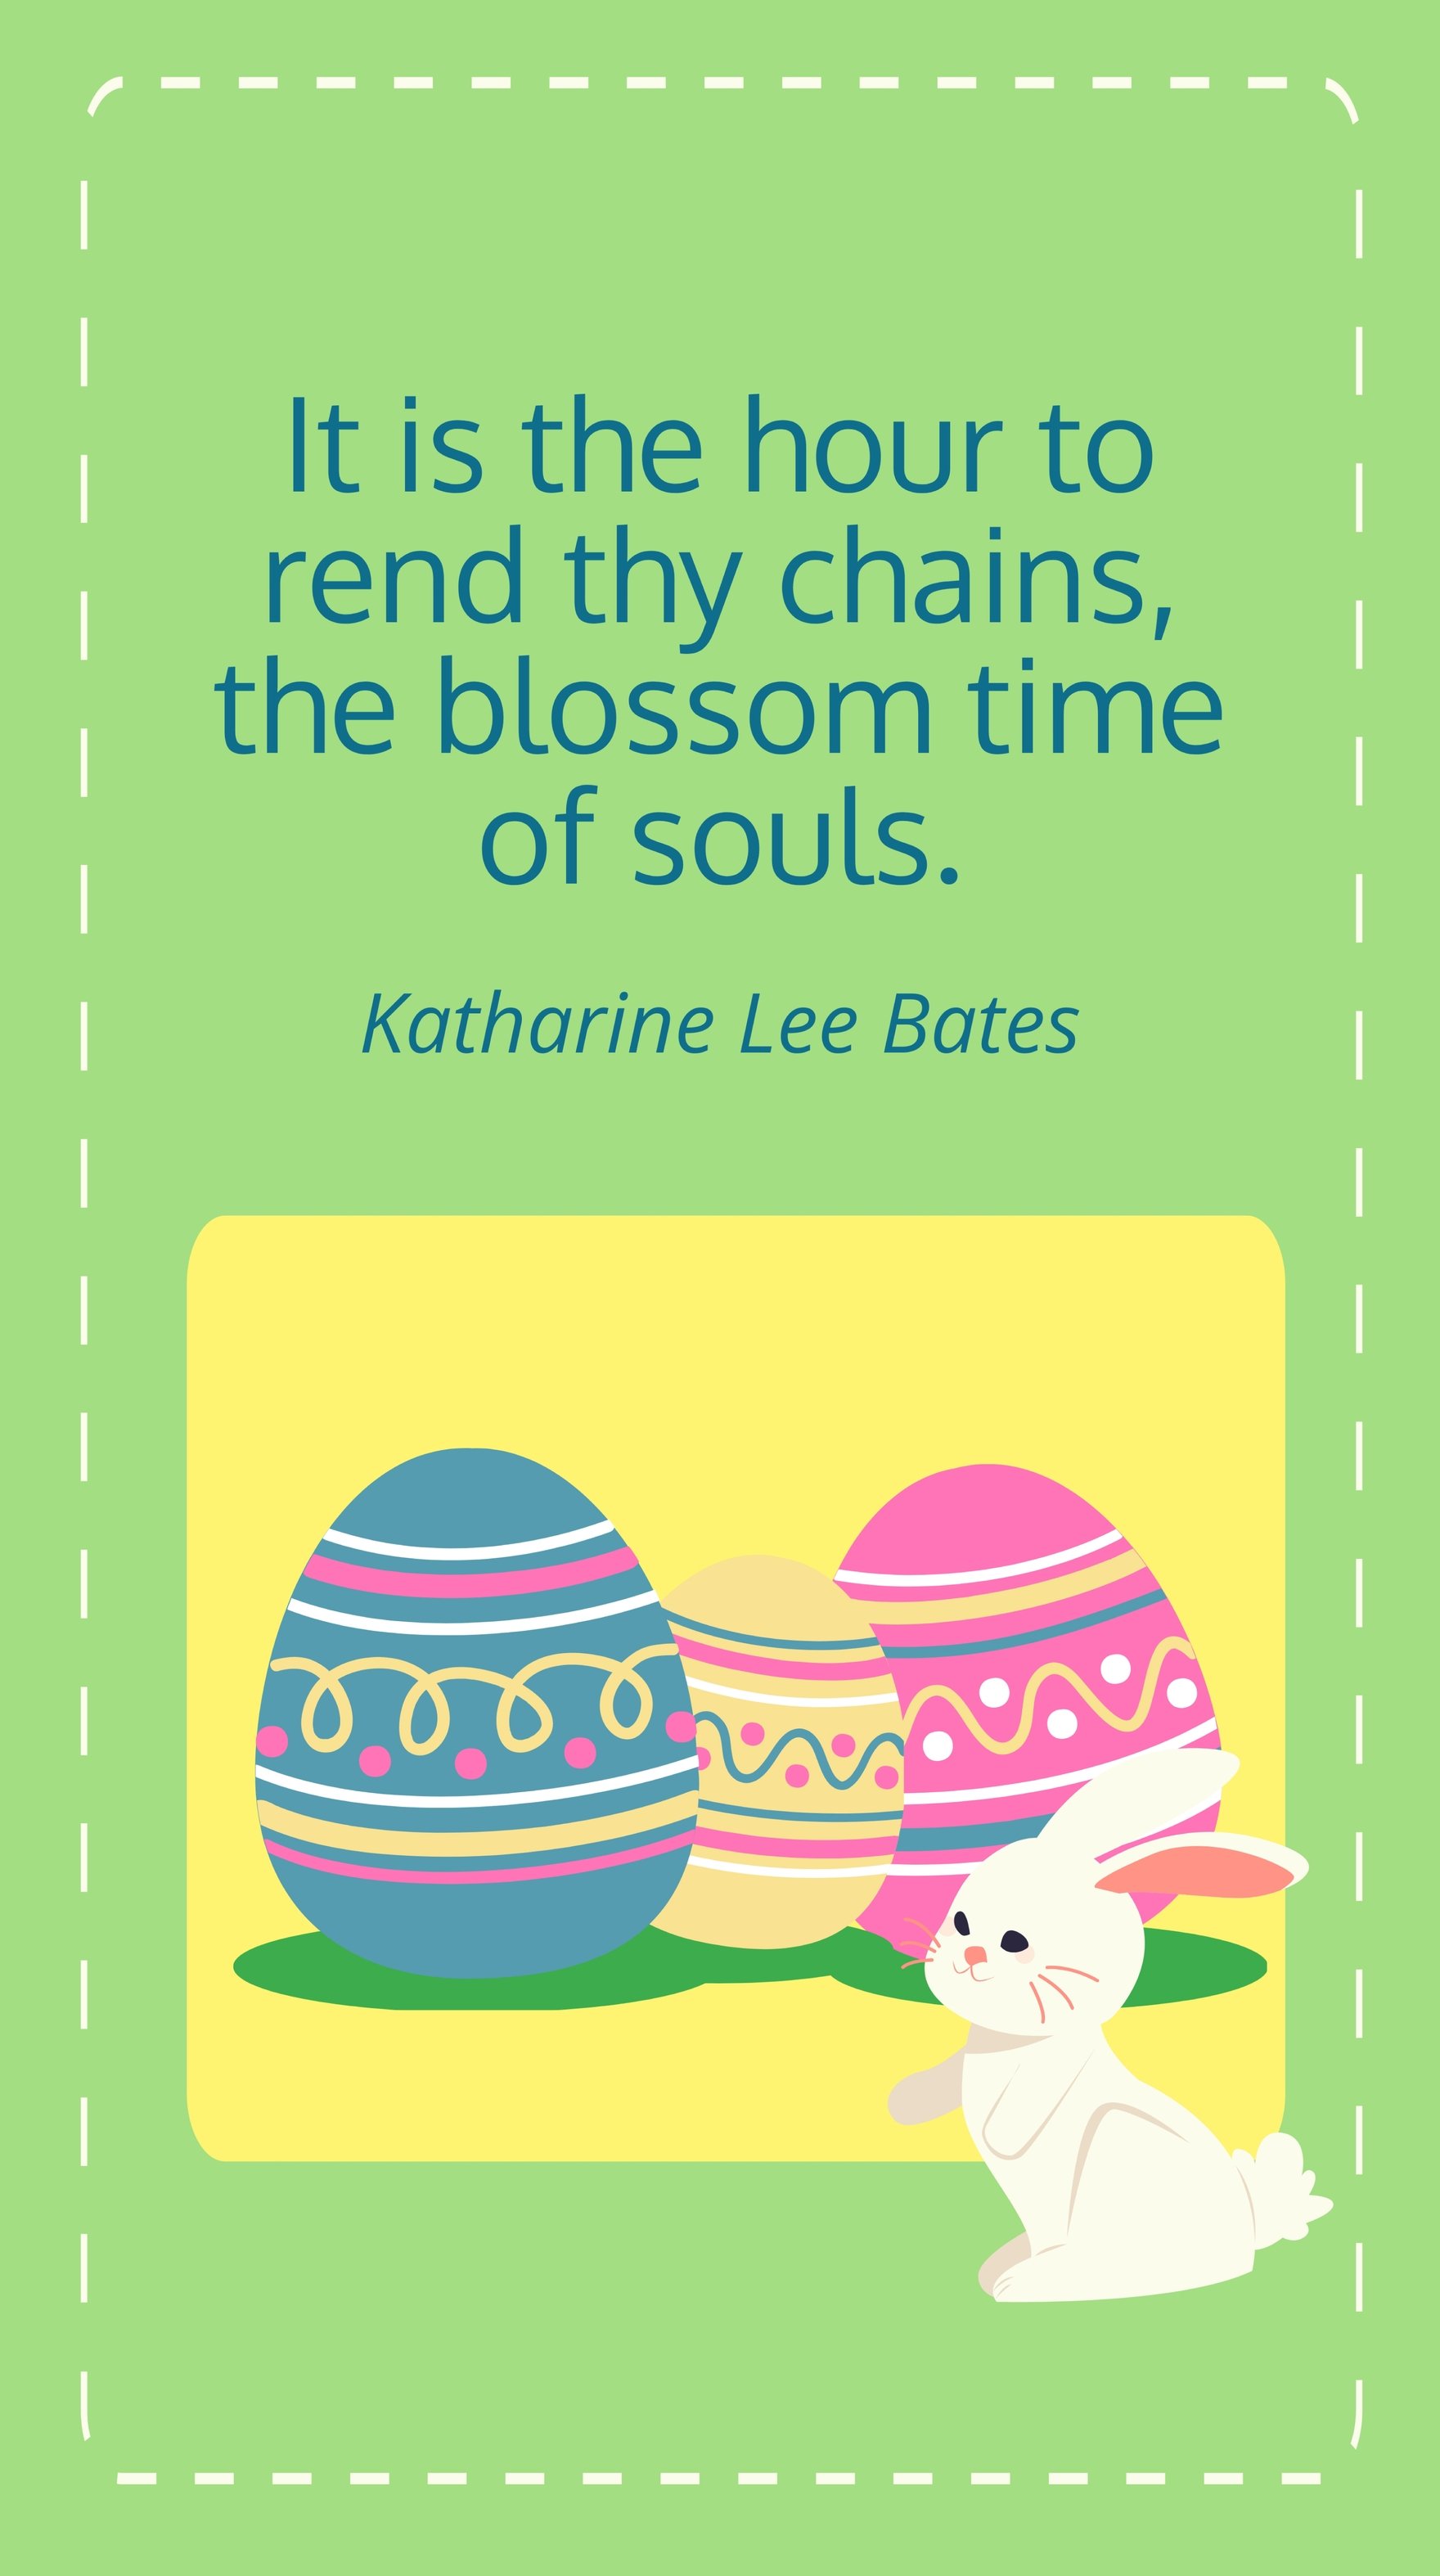 Katharine Lee Bates - It is the hour to rend thy chains, the blossom time of souls.